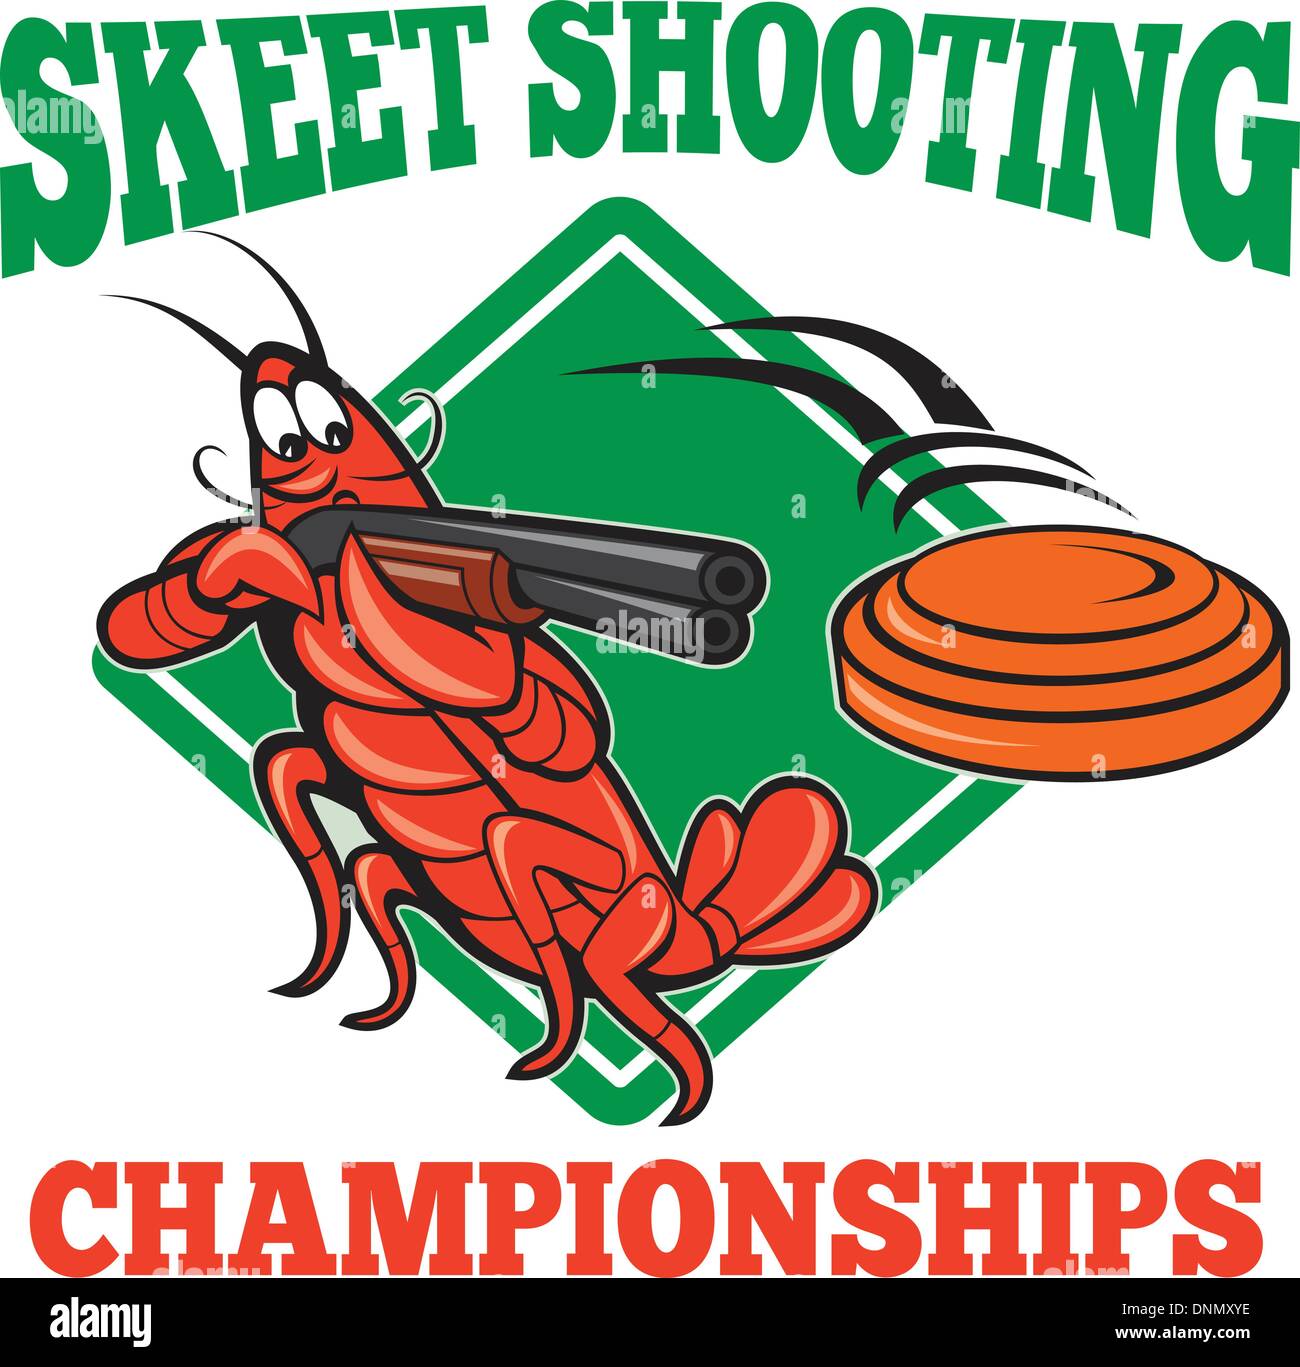 Illustration of a crayfish lobster skeet target shooting using shotgun rifle aiming at flying clay disk with diamond shape in background done in cartoon style with text skeet shooting championships. Stock Vector